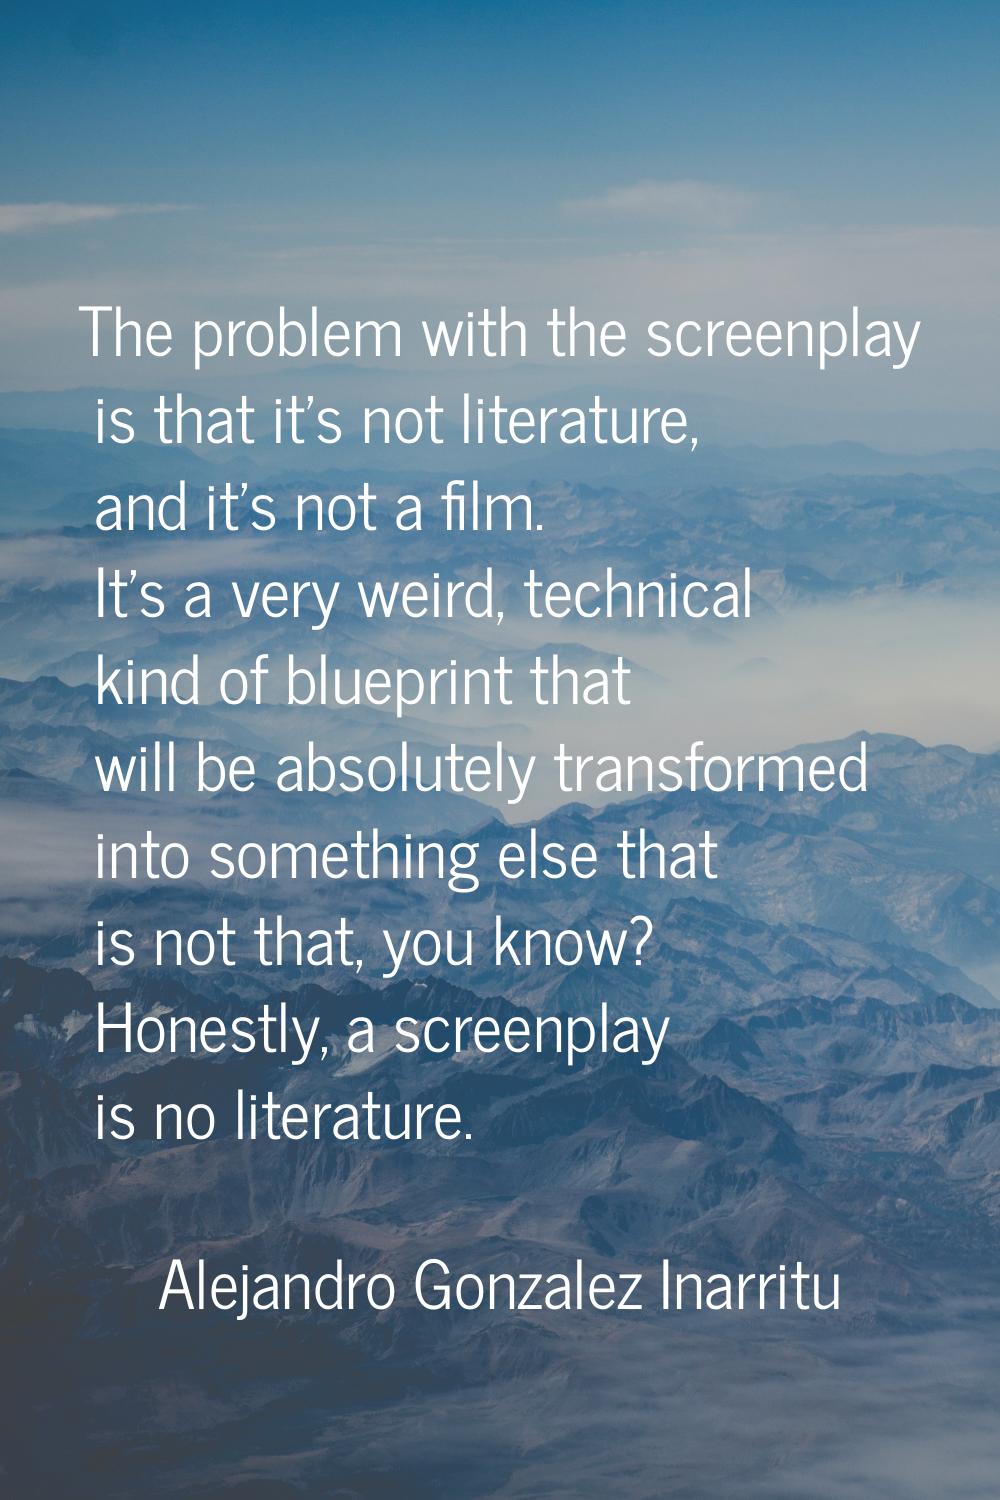 The problem with the screenplay is that it's not literature, and it's not a film. It's a very weird